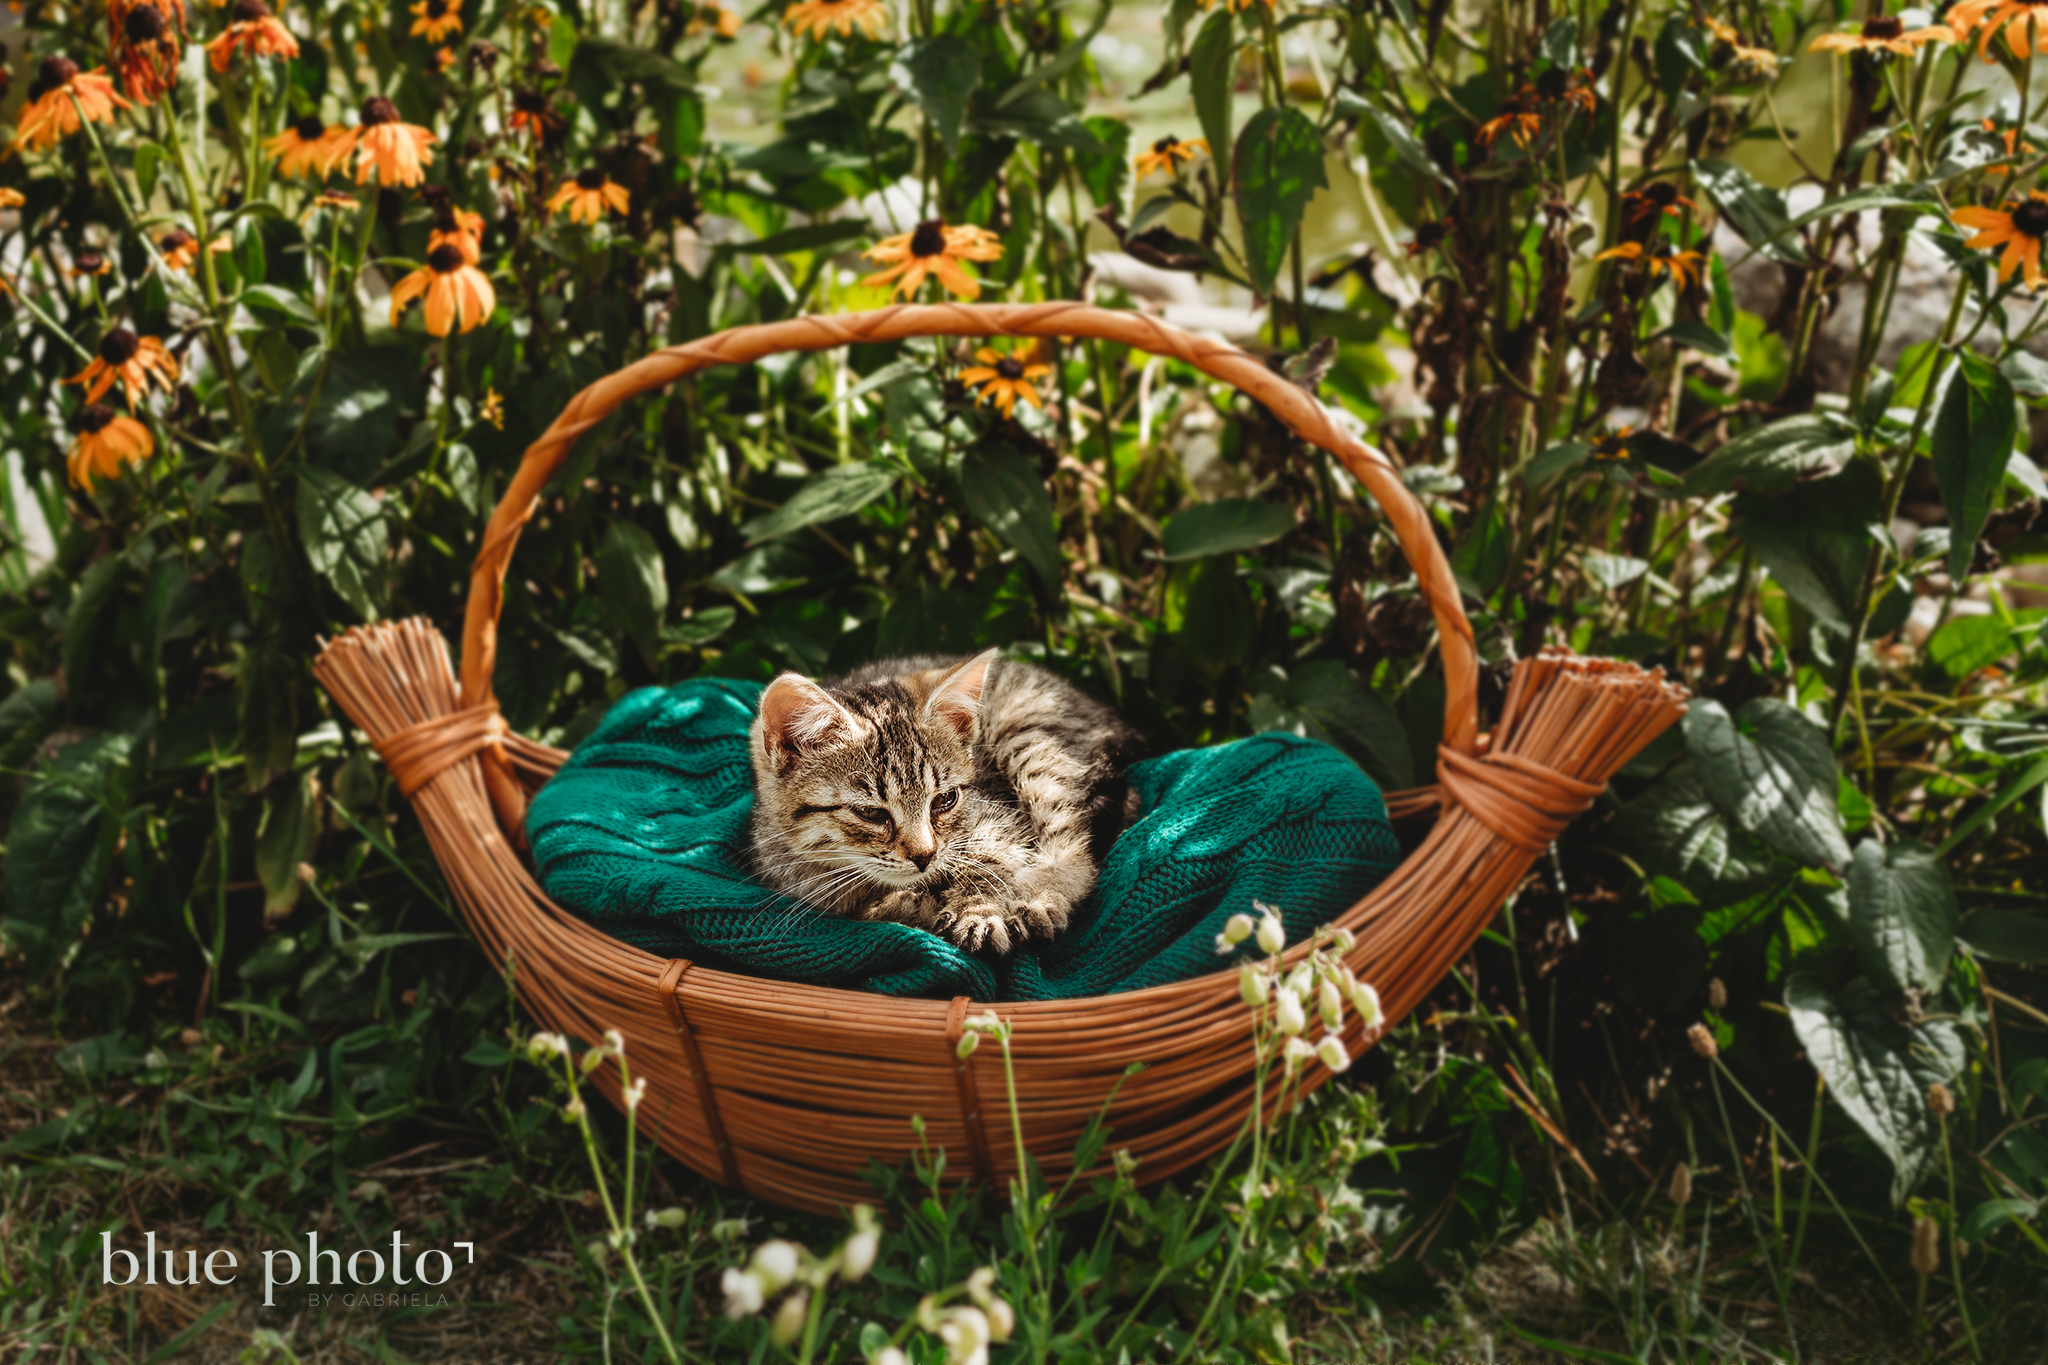 Little Kitten in the basket - West London based family and pet photography, outdoor session 